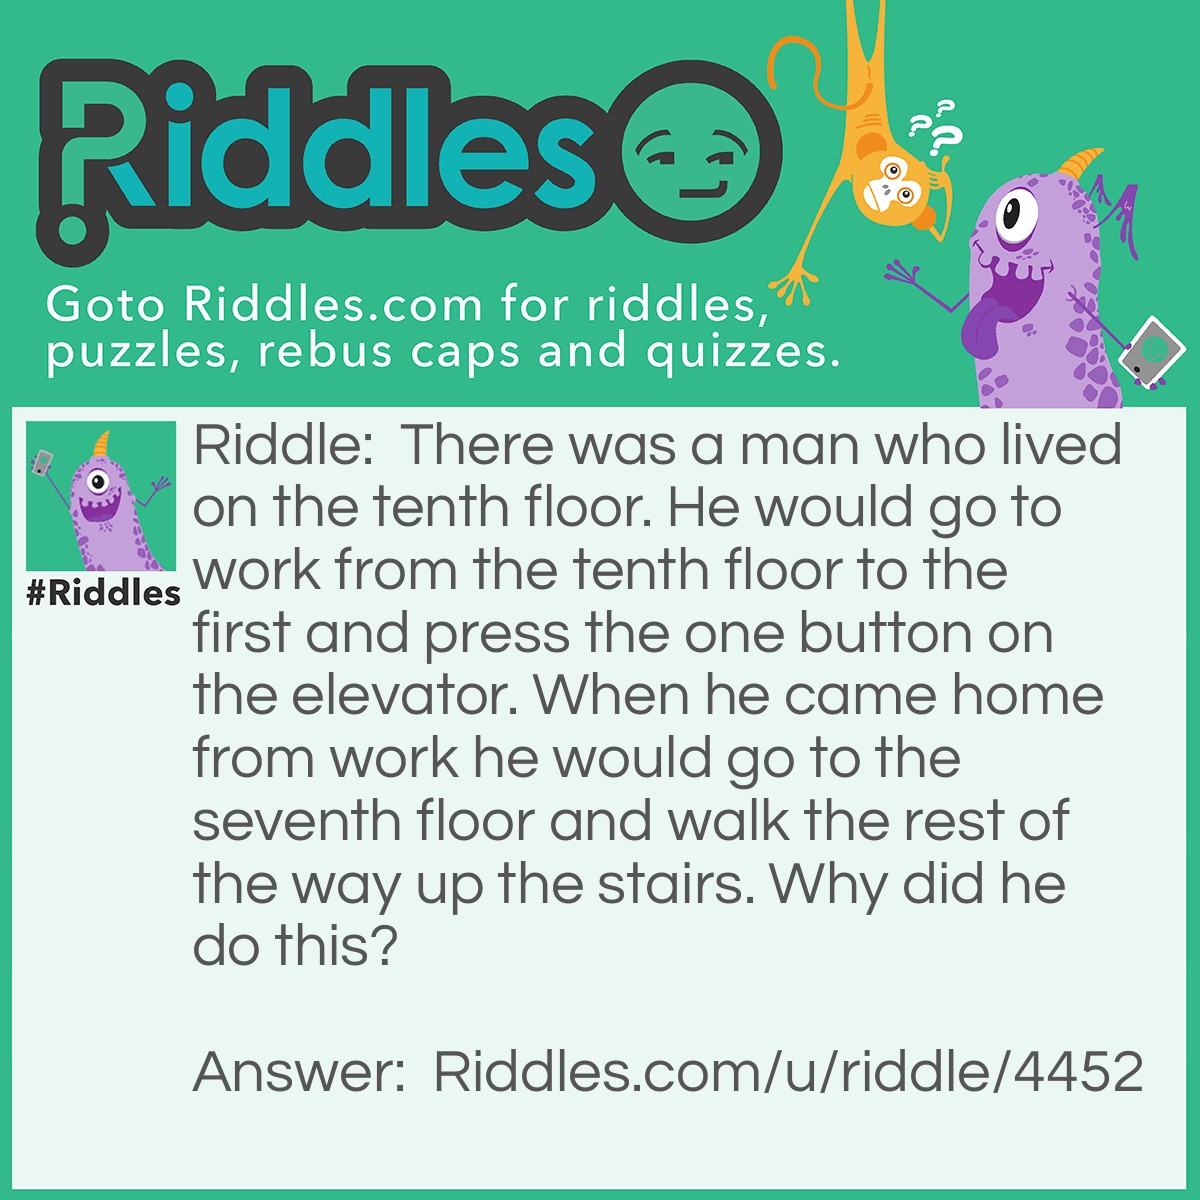 Riddle: There was a man who lived on the tenth floor. He would go to work from the tenth floor to the first and press the one button on the elevator. When he came home from work he would go to the seventh floor and walk the rest of the way up the stairs. Why did he do this? Answer: He was to short to press the tenth floor button. >:))))))))))